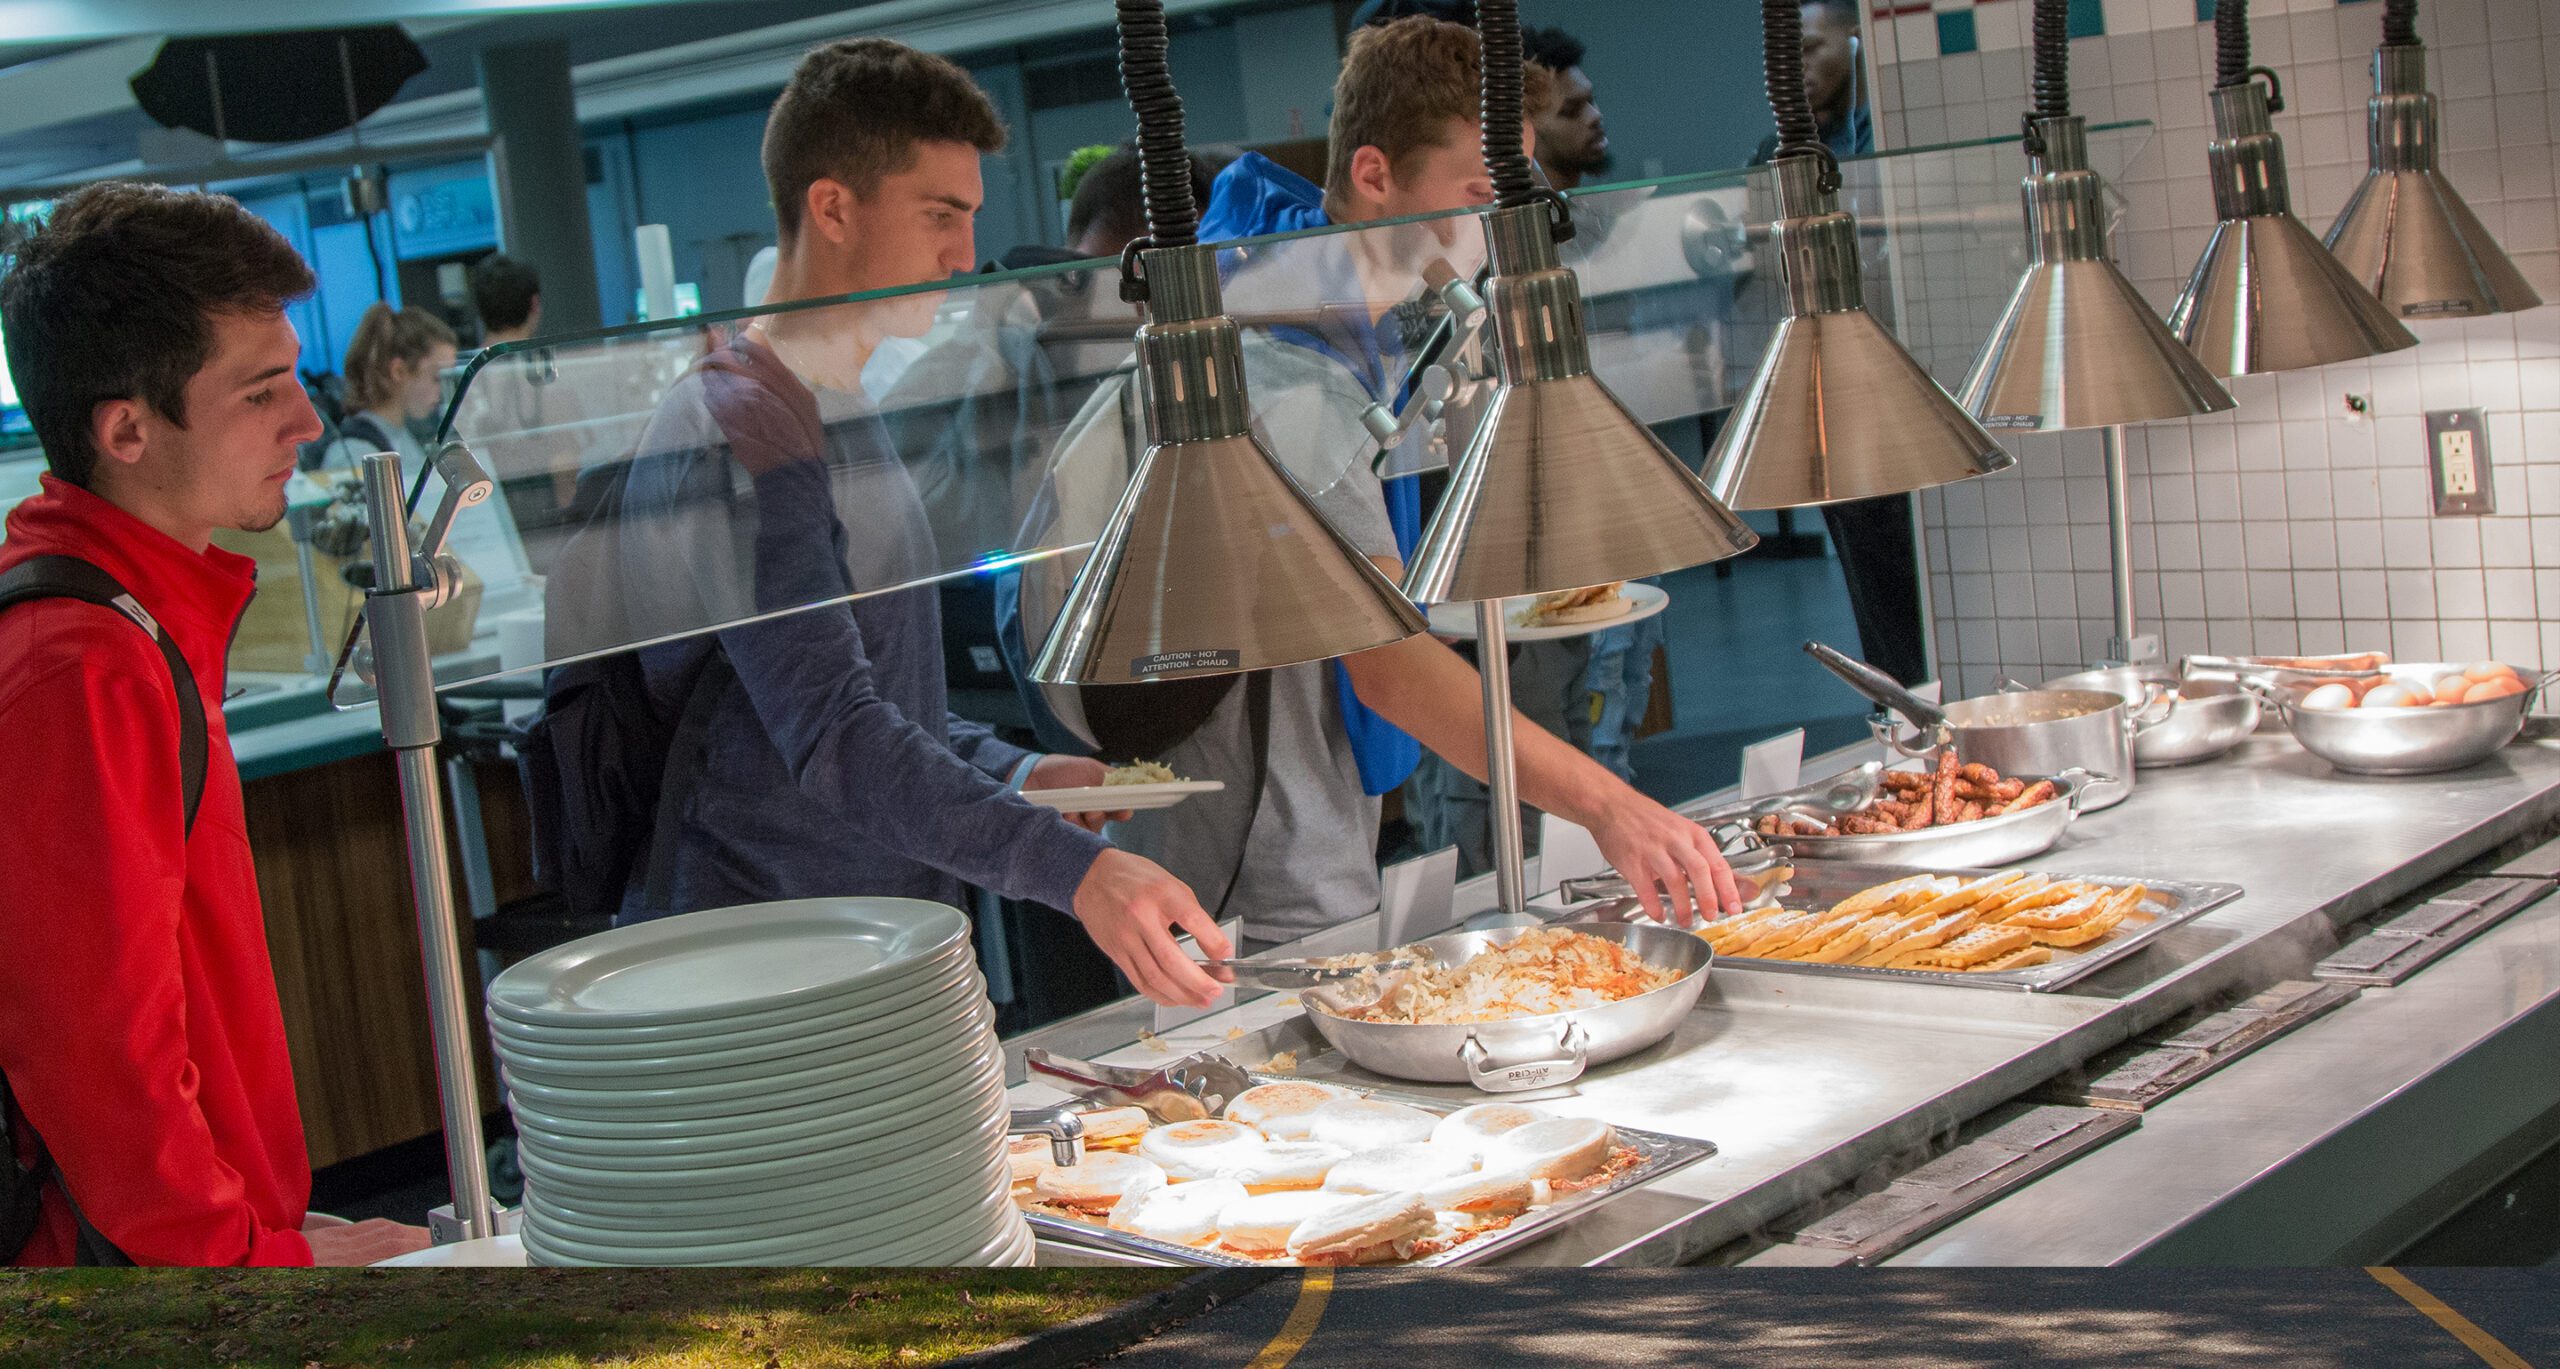 Assumption students selecting from a variety of delicious food at Taylor Dining Hall.